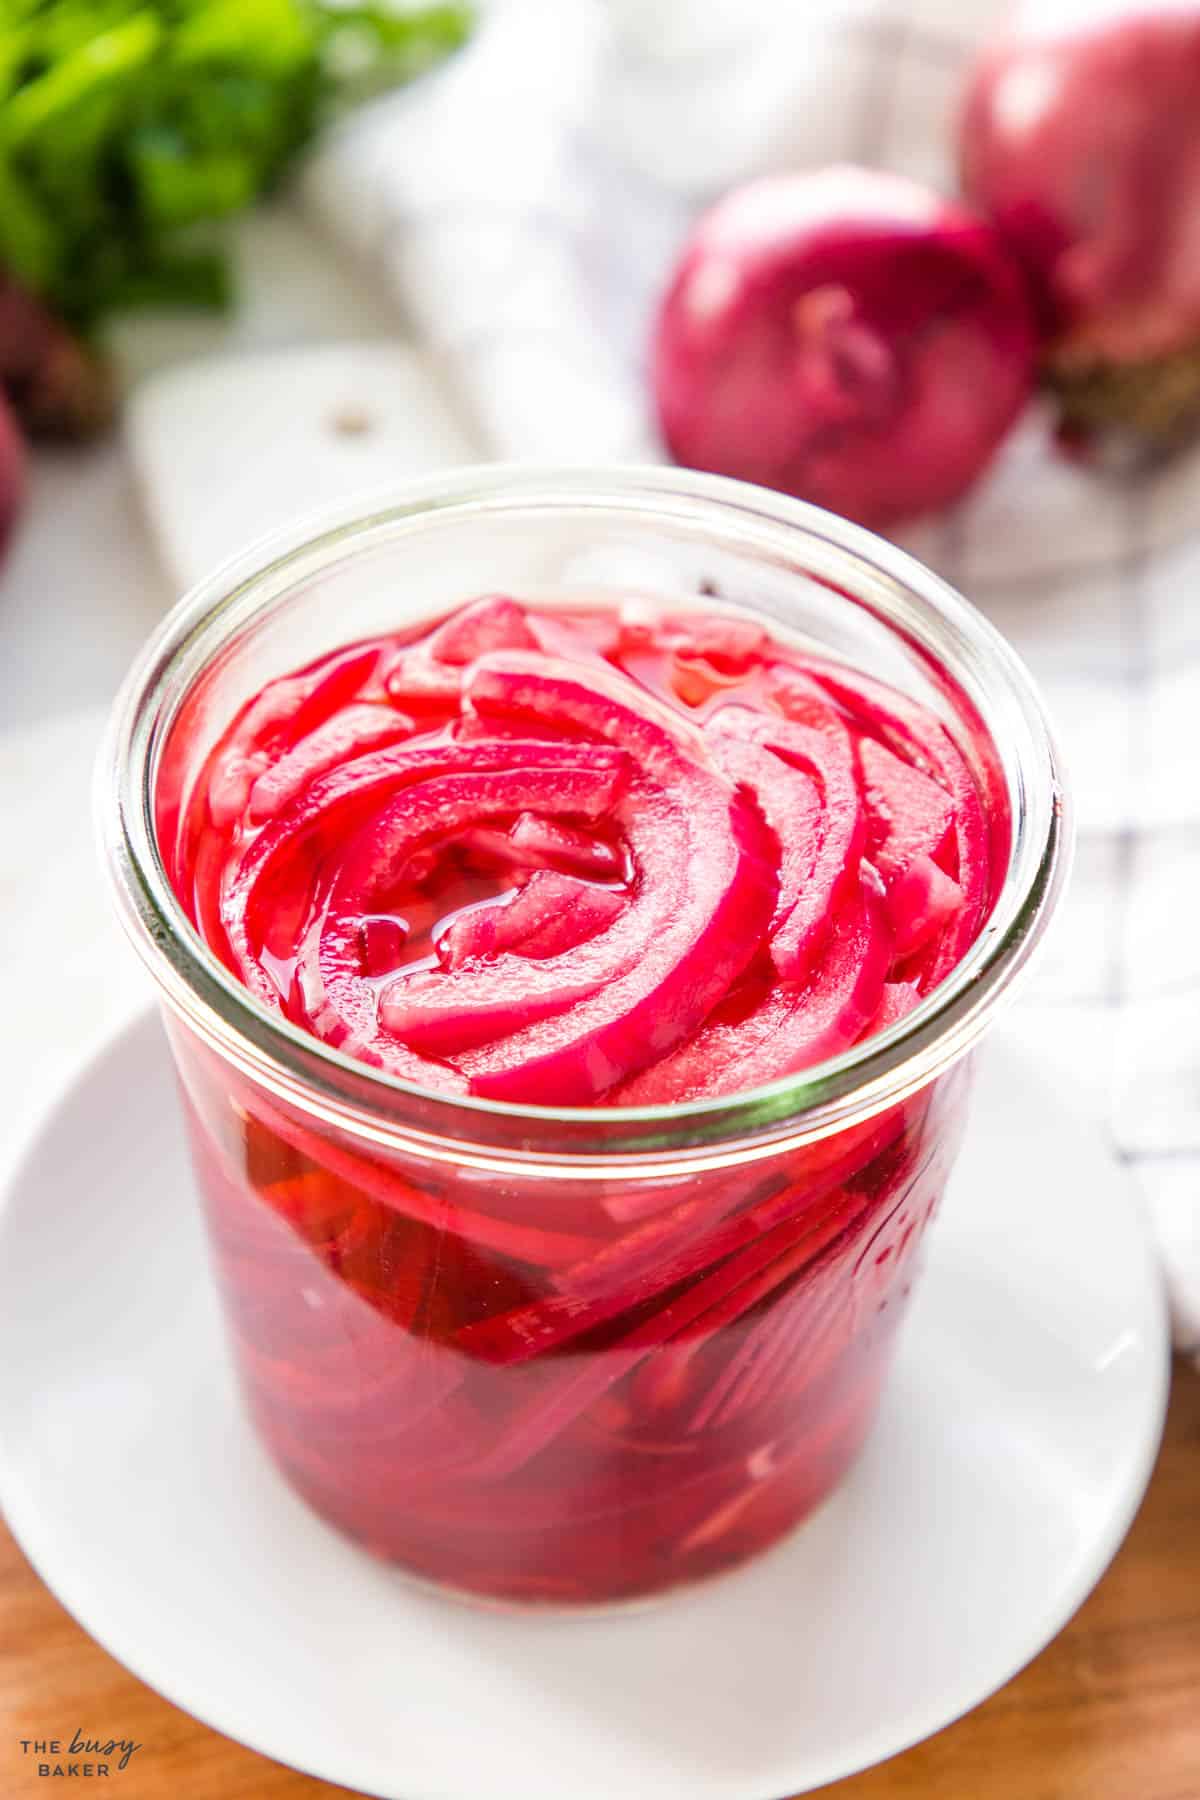 quick and easy pickled onions